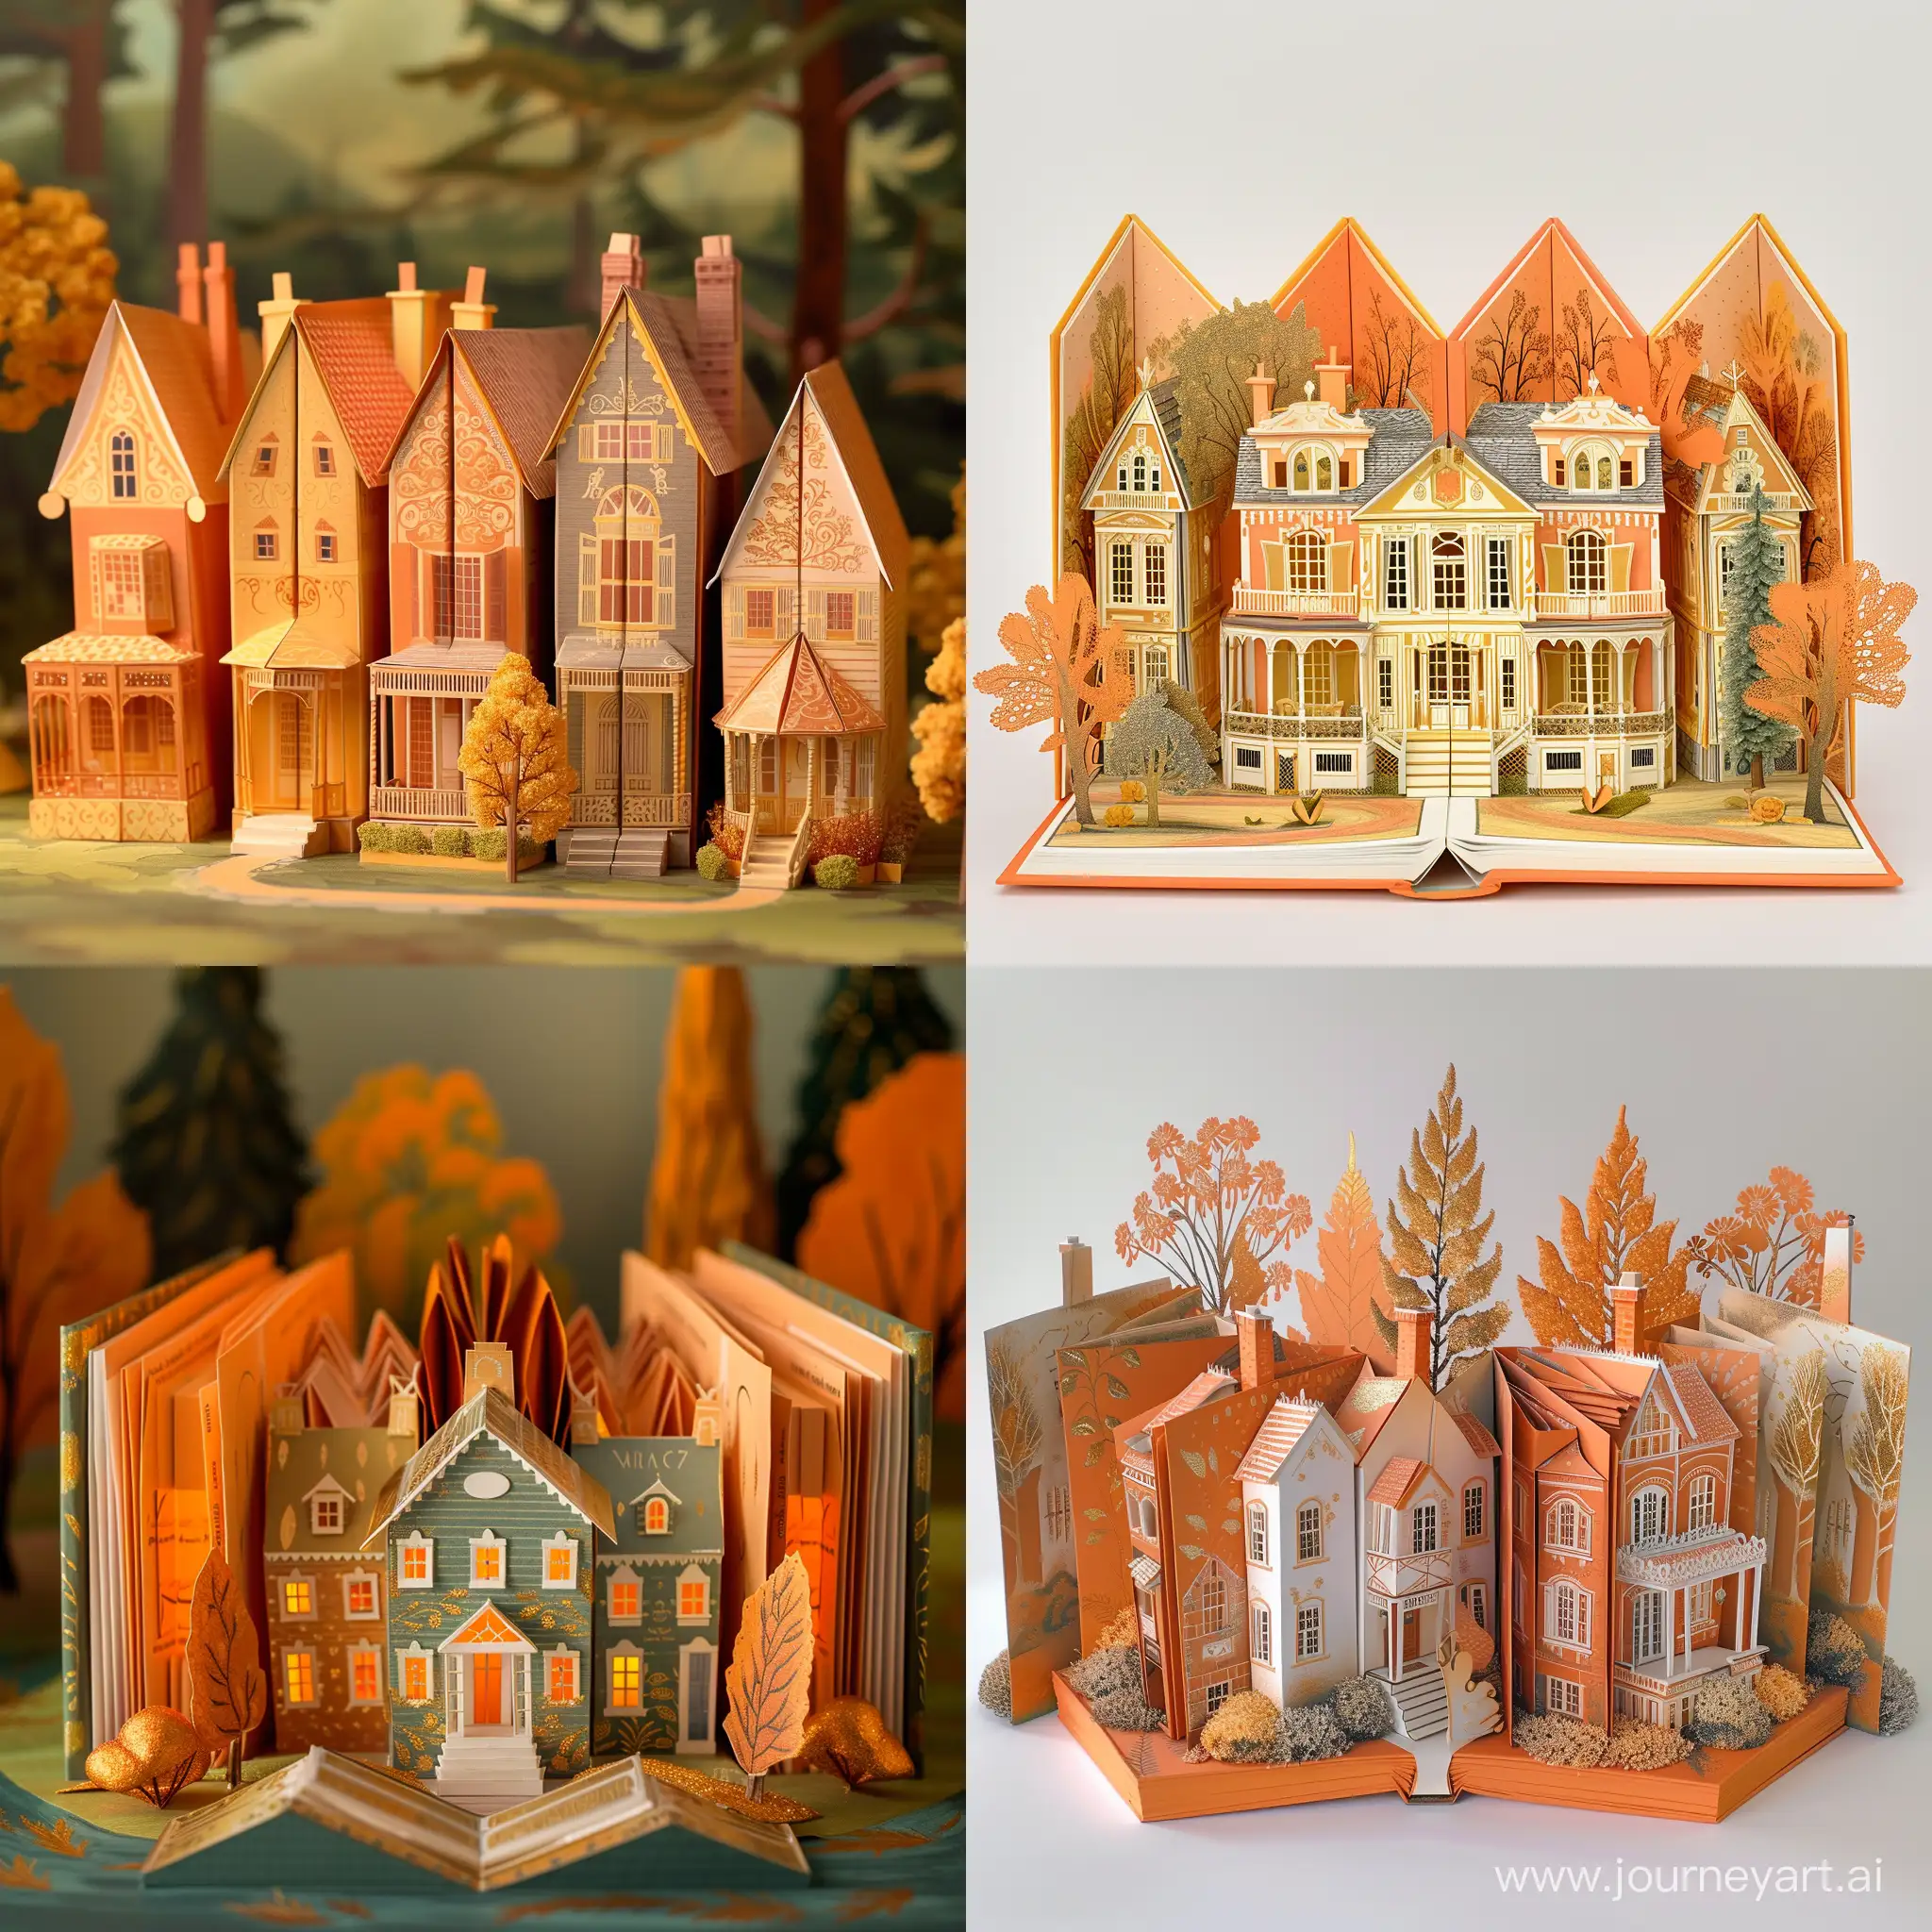 the paper books folded into houses are open, in the style of animated film pioneer, victorian-inspired illustrations, intricately sculpted, george herriman, light orange and gold, sung kim, diorama. The scene should showcase the March family estate from the novel 'Little Women', capturing the essence of 19th-century English countryside estates